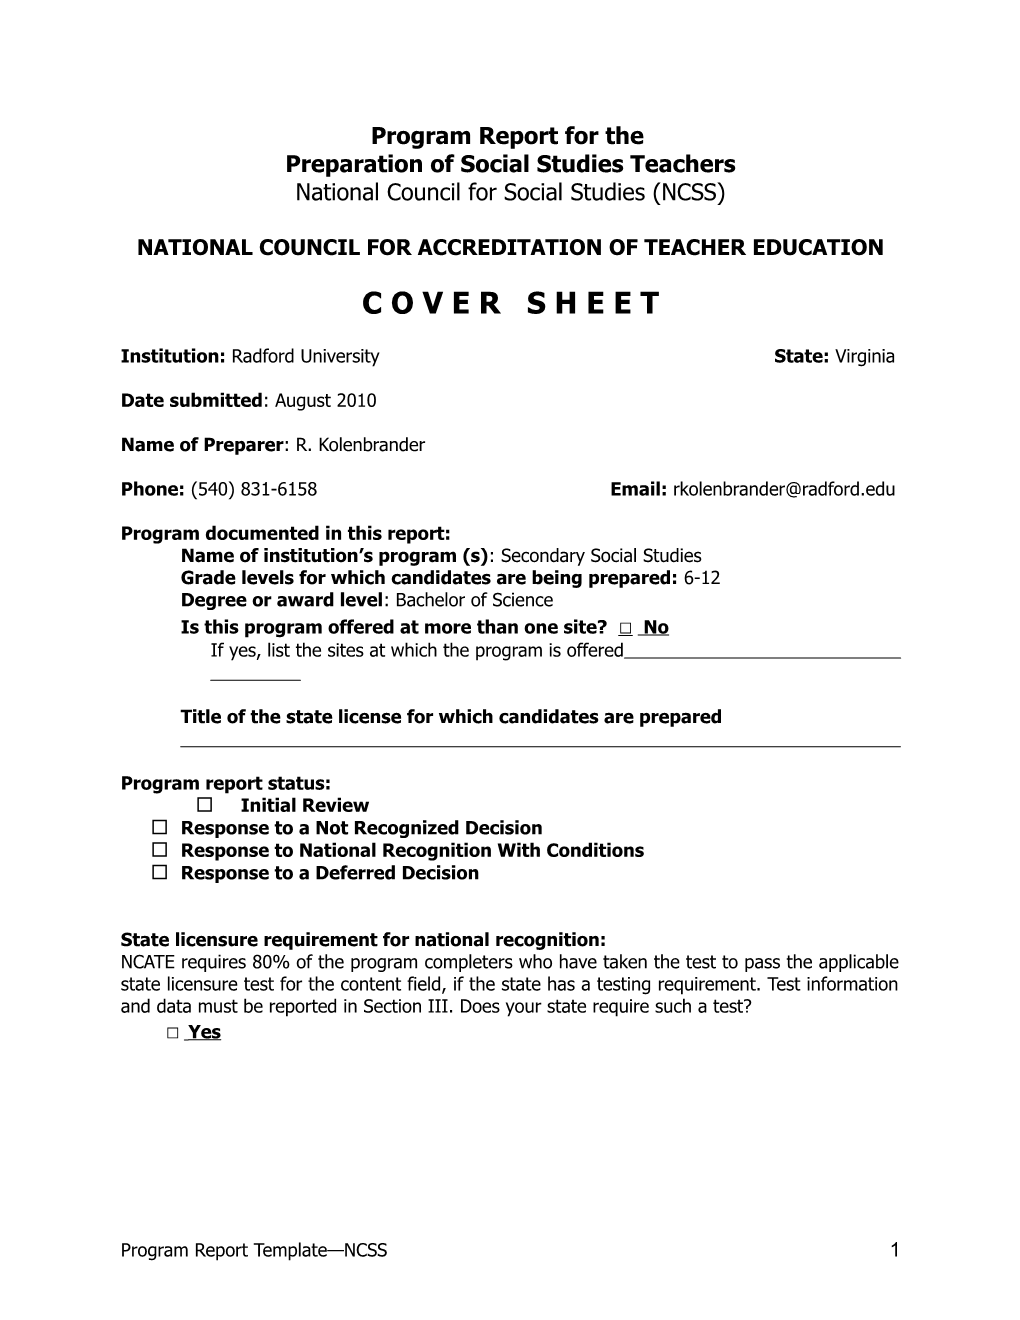 National Council for Accreditation of Teacher Education s3